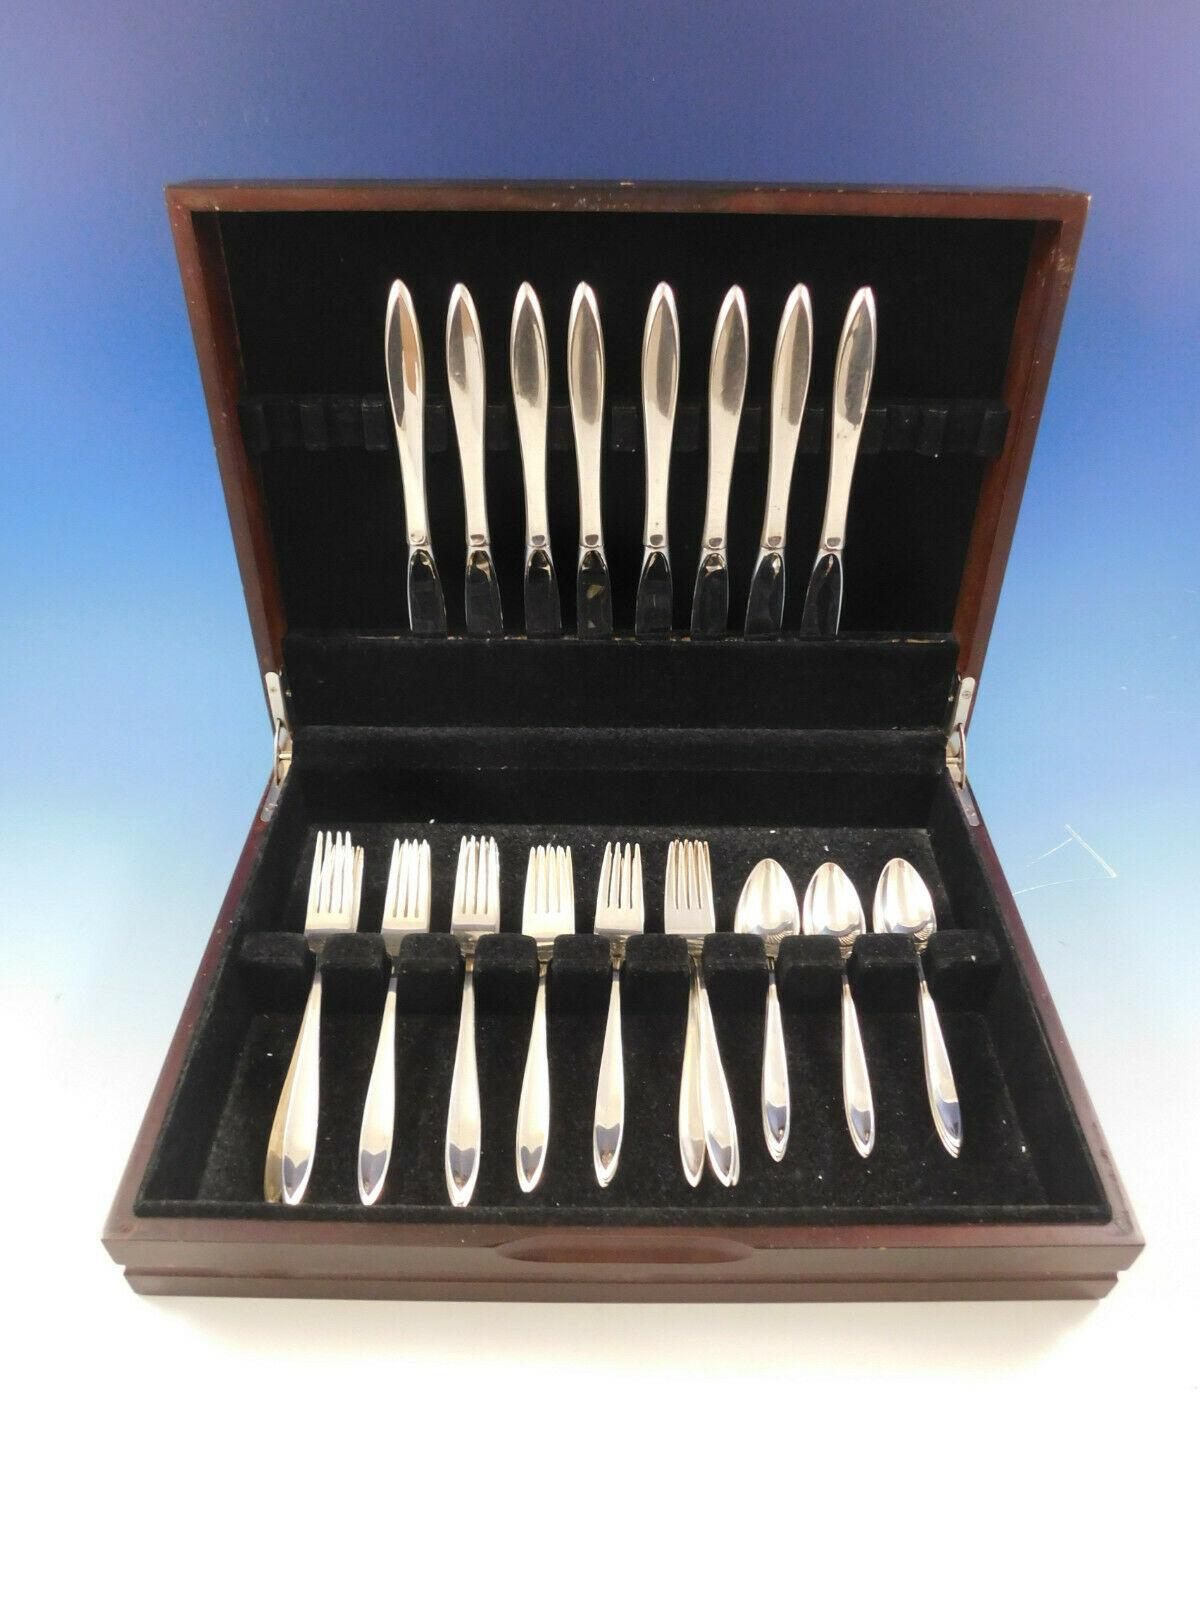 Esprit by Gorham sterling silver flatware set of 32 pieces. This set includes:

8 knives, 9